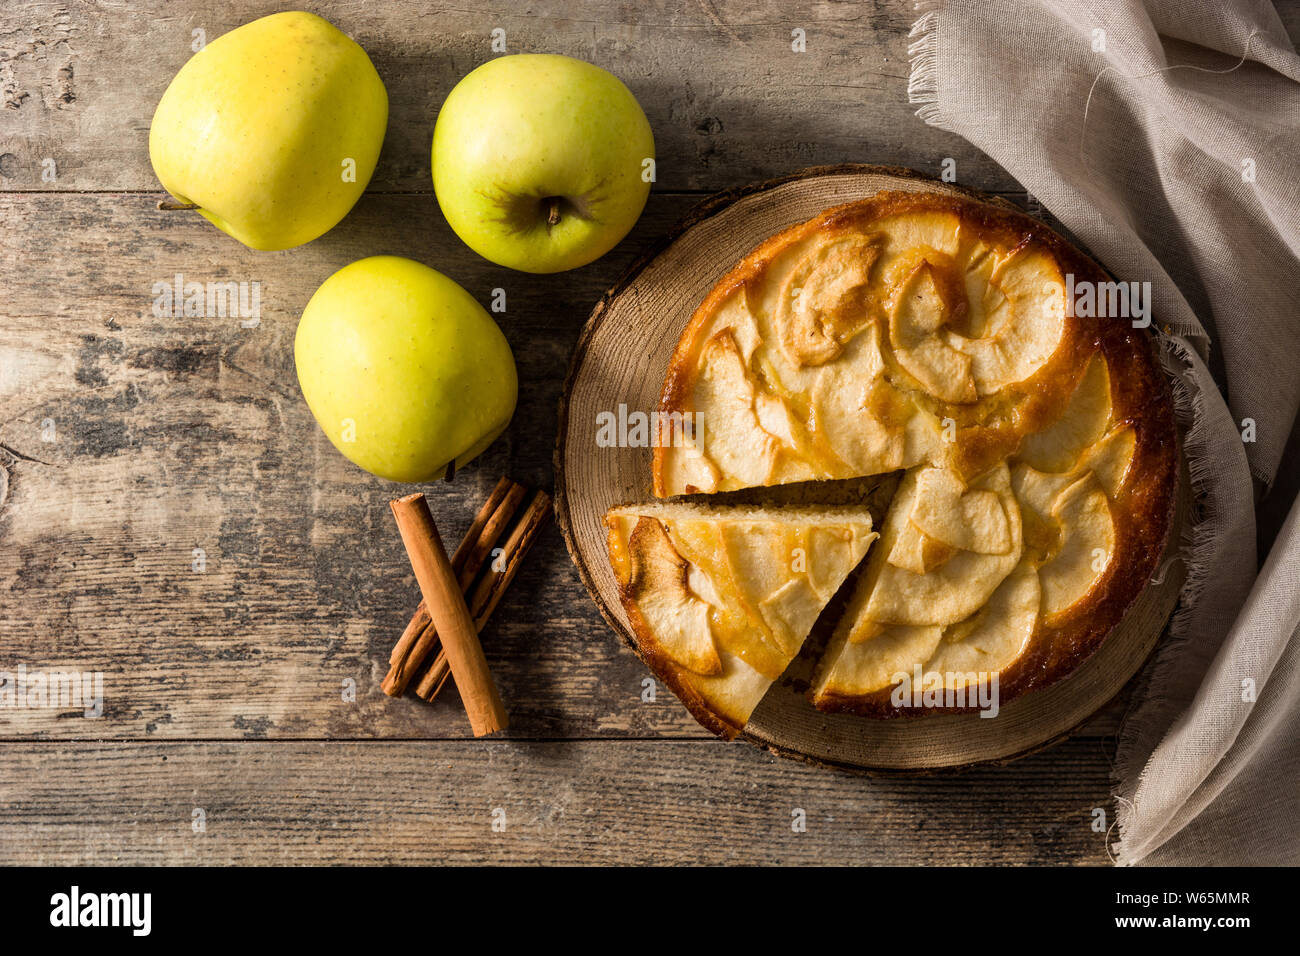 Homemade apple pie on wooden table. Top view. Copy space Stock Photo